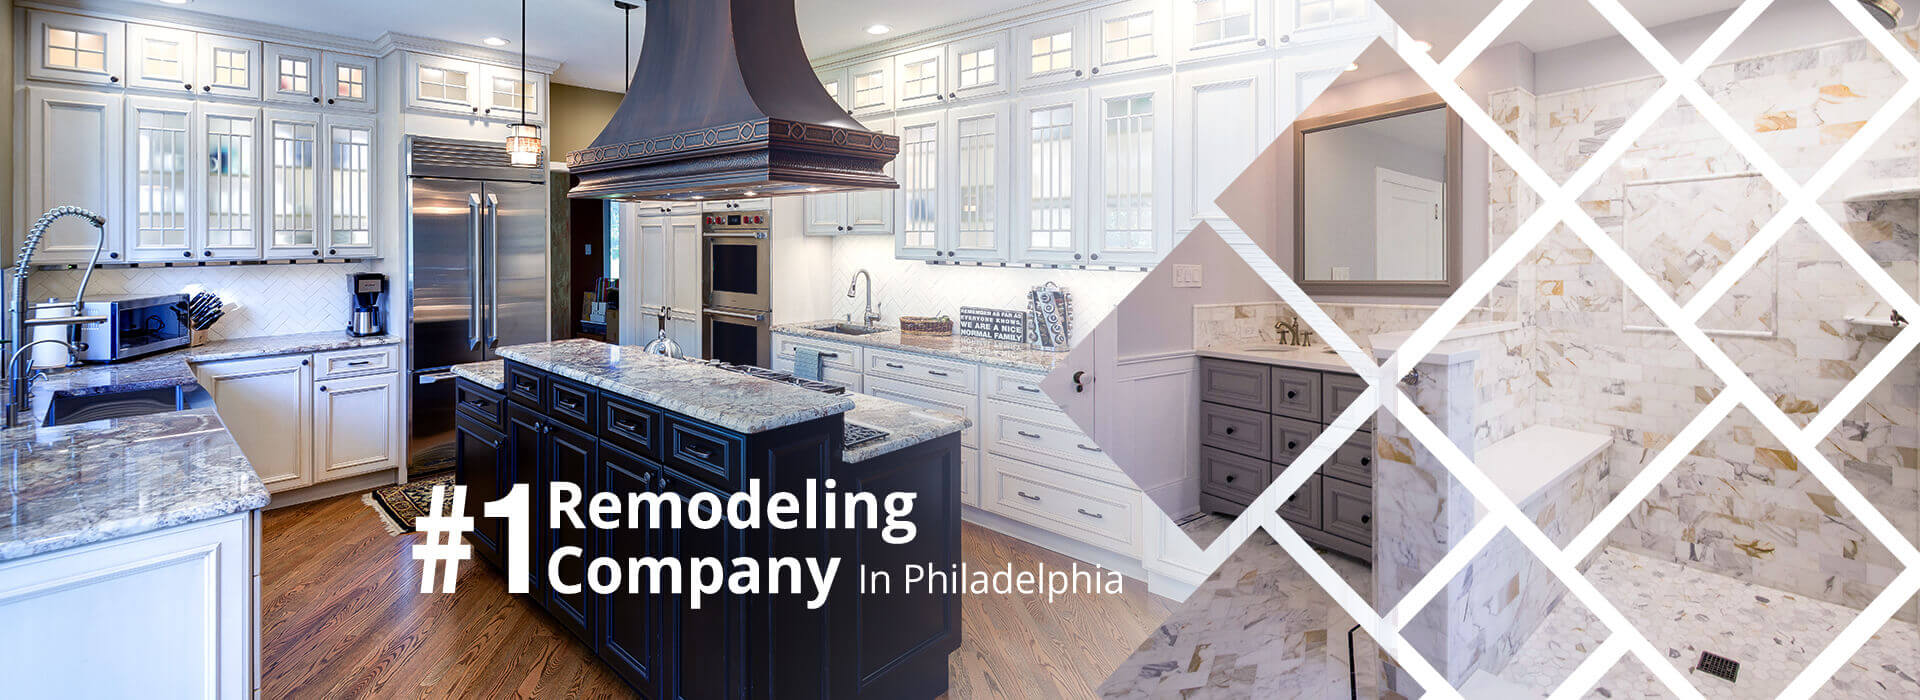 #1 FIRST REMODELING COMPANY IN PHILADELPHIA